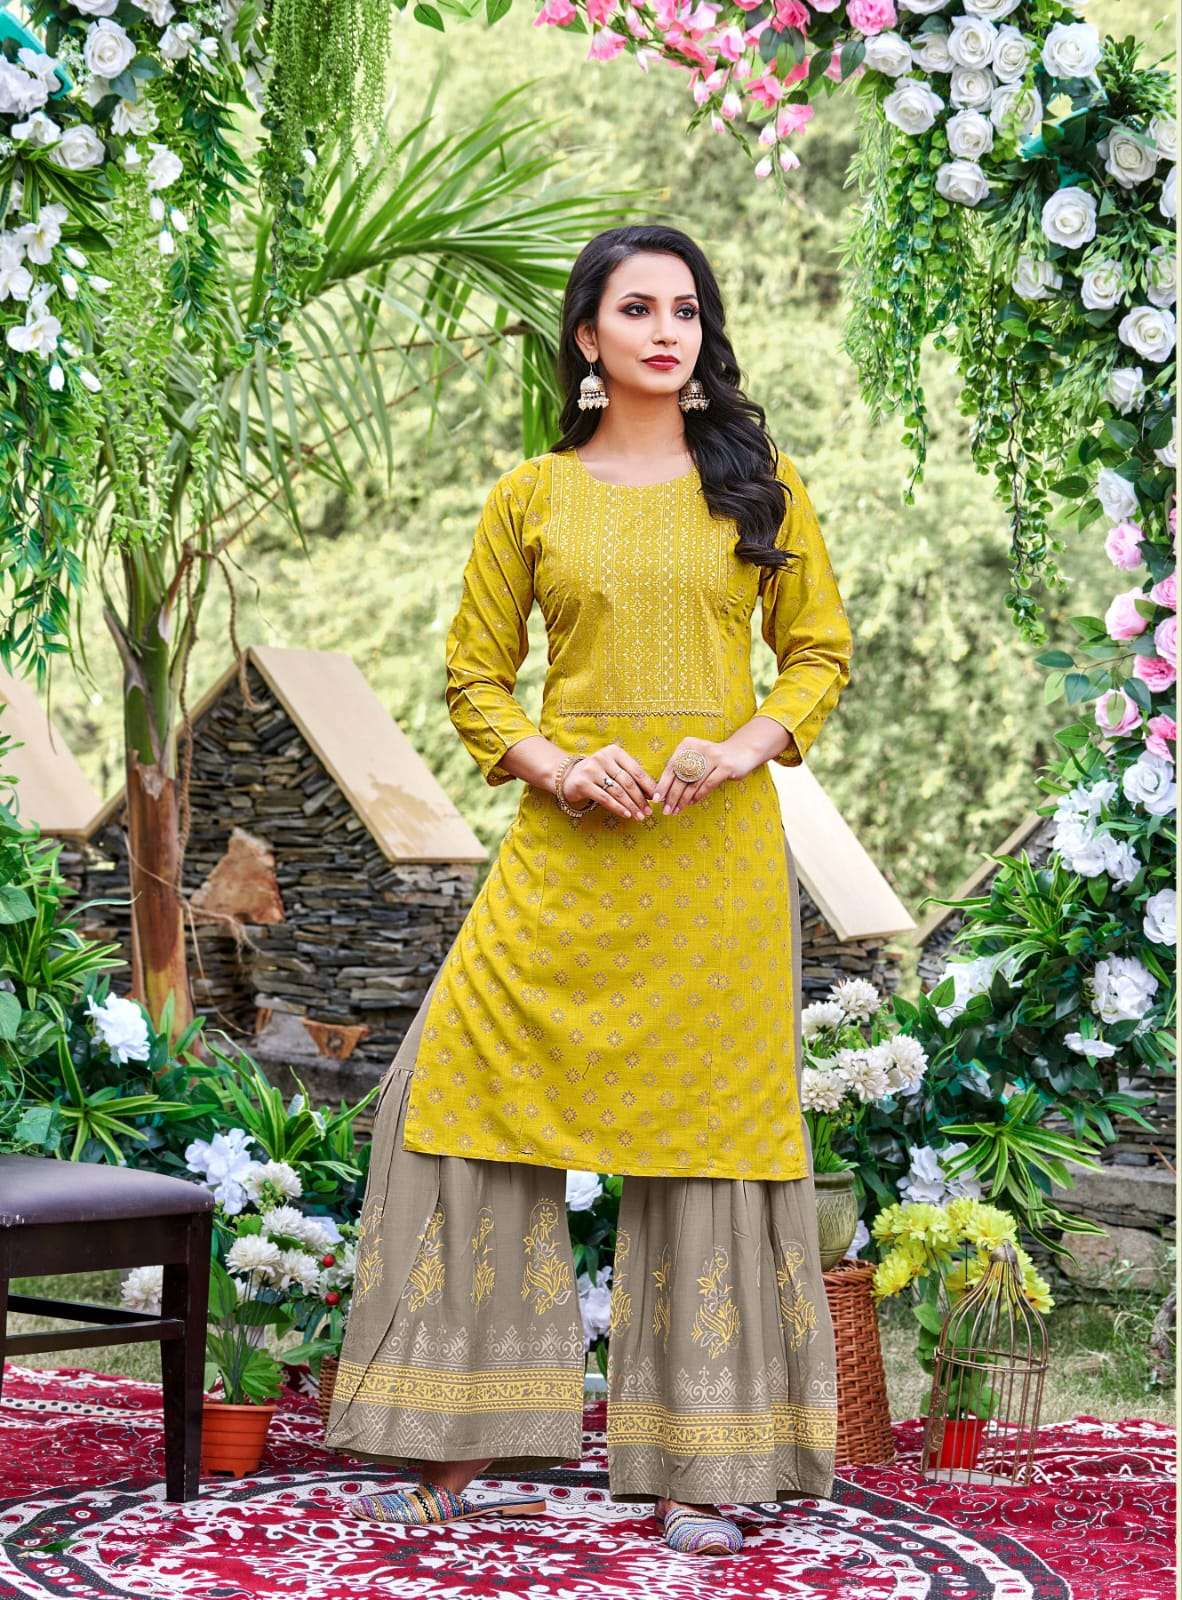 Tips and Tops Cindrella Vol 3 Printed Georgette Kurti Gown Designs